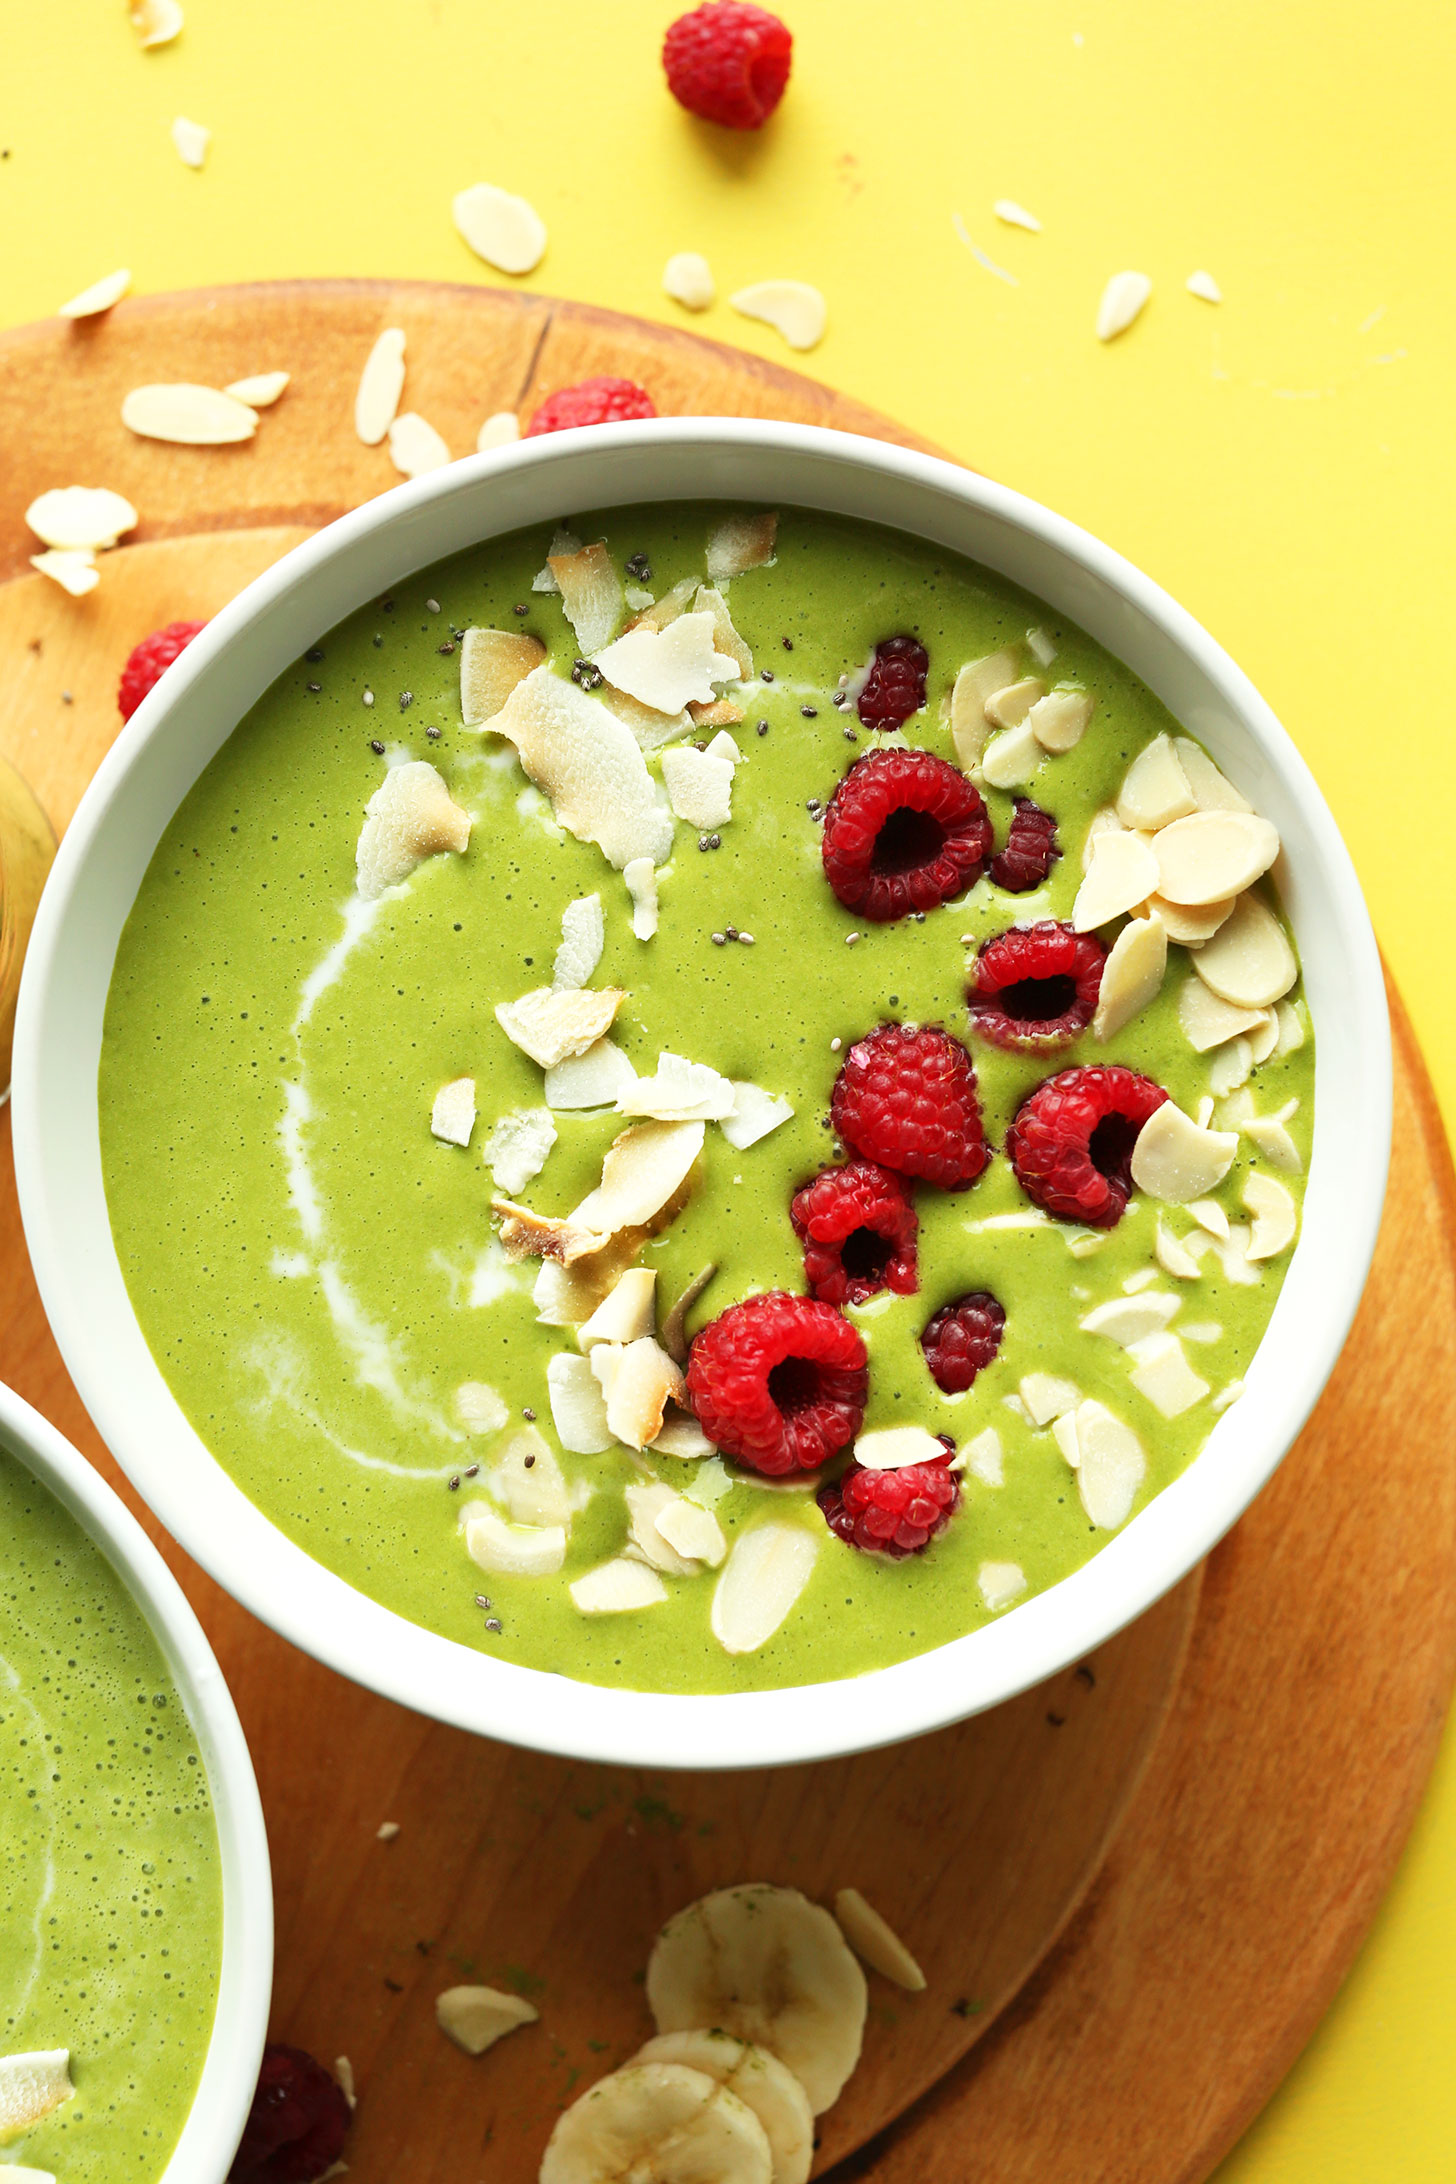 “Green Goodness Powerhouse: Delicious Matcha Smoothie Recipes to Nourish and Energize!”